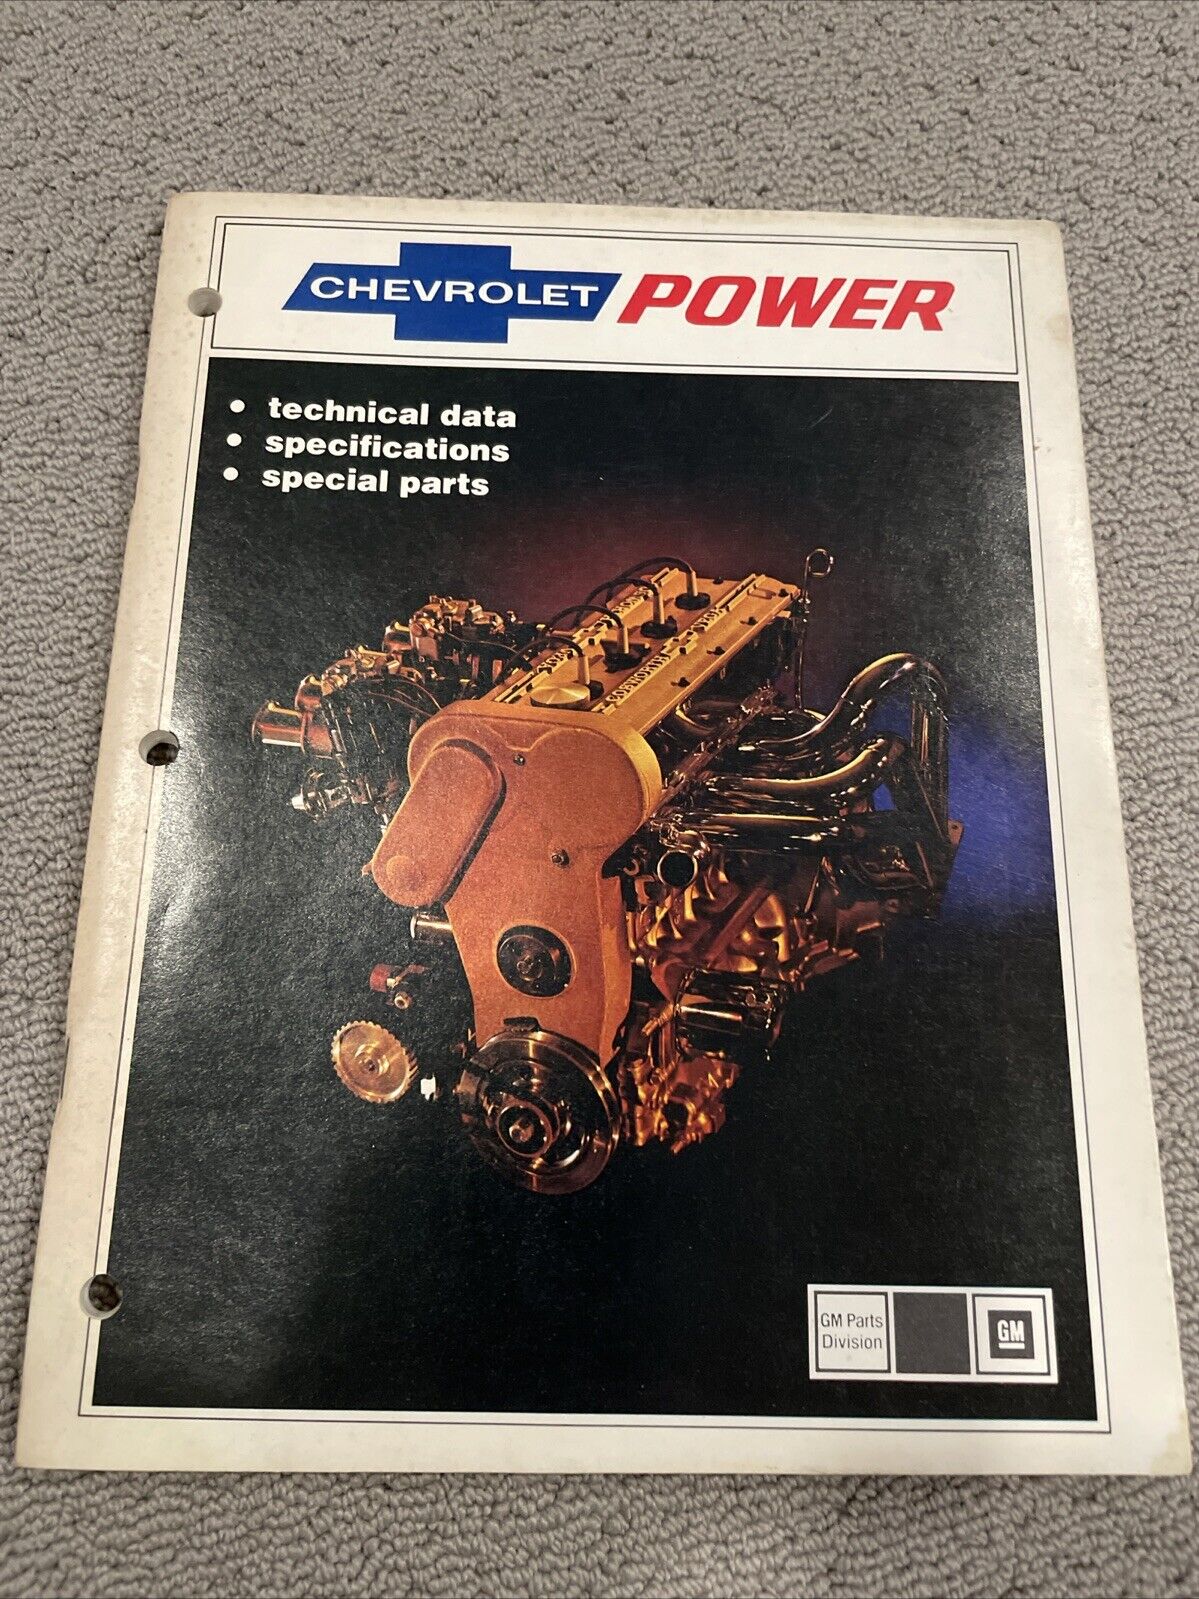 1975 CHEVROLET POWER 1st BOOK Technical Data Specs Special Parts MANUAL Service